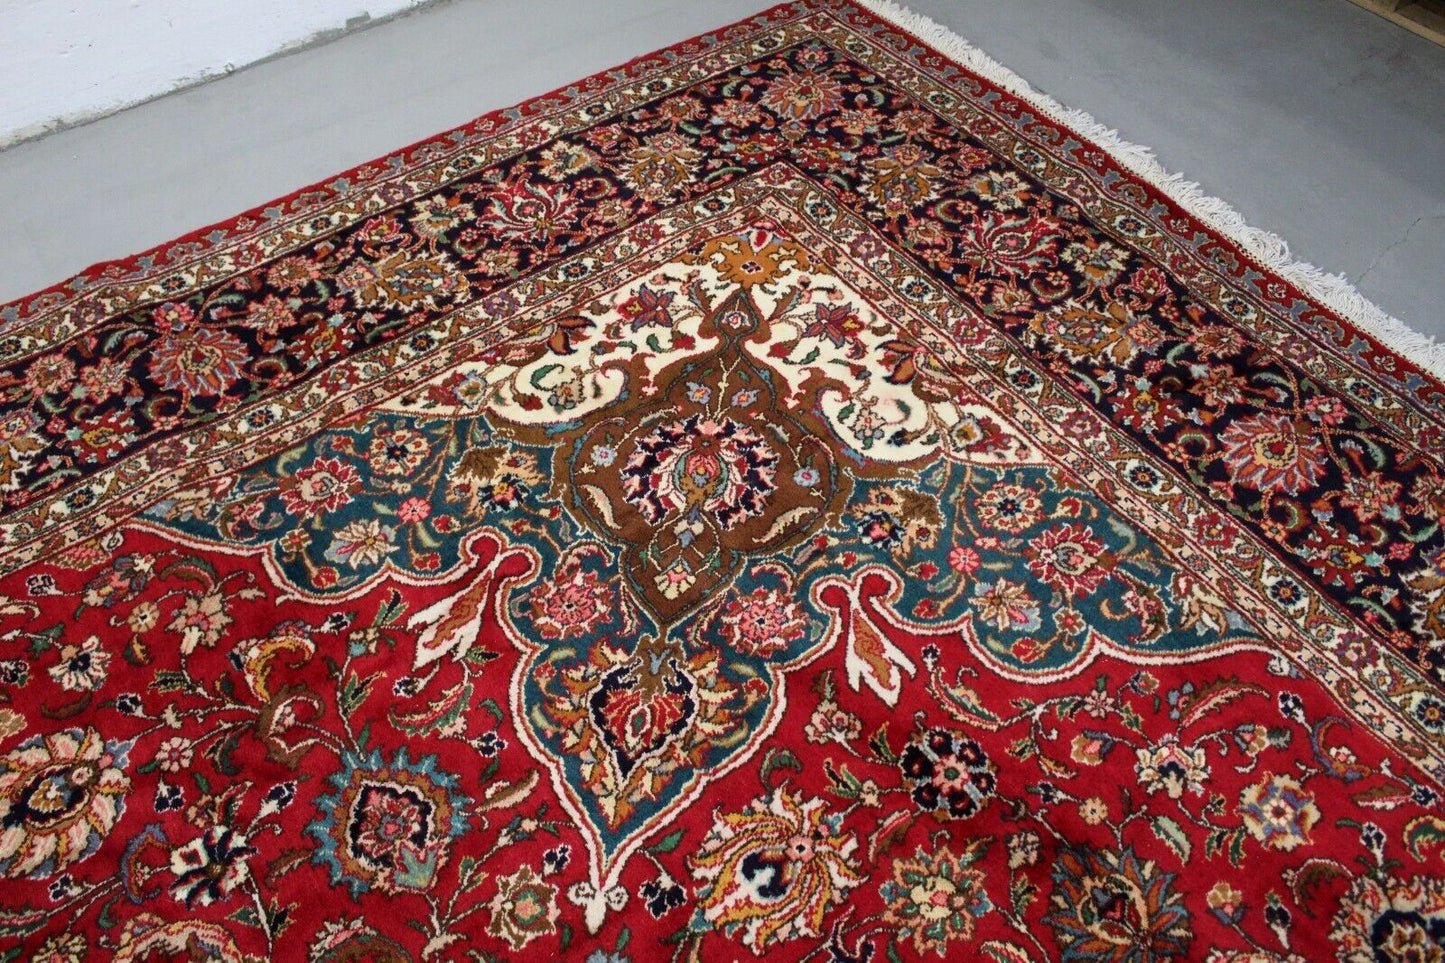 Good Condition Reflecting Quality and Careful Maintenance of Vintage Tabriz Oversize Rug - 1960s